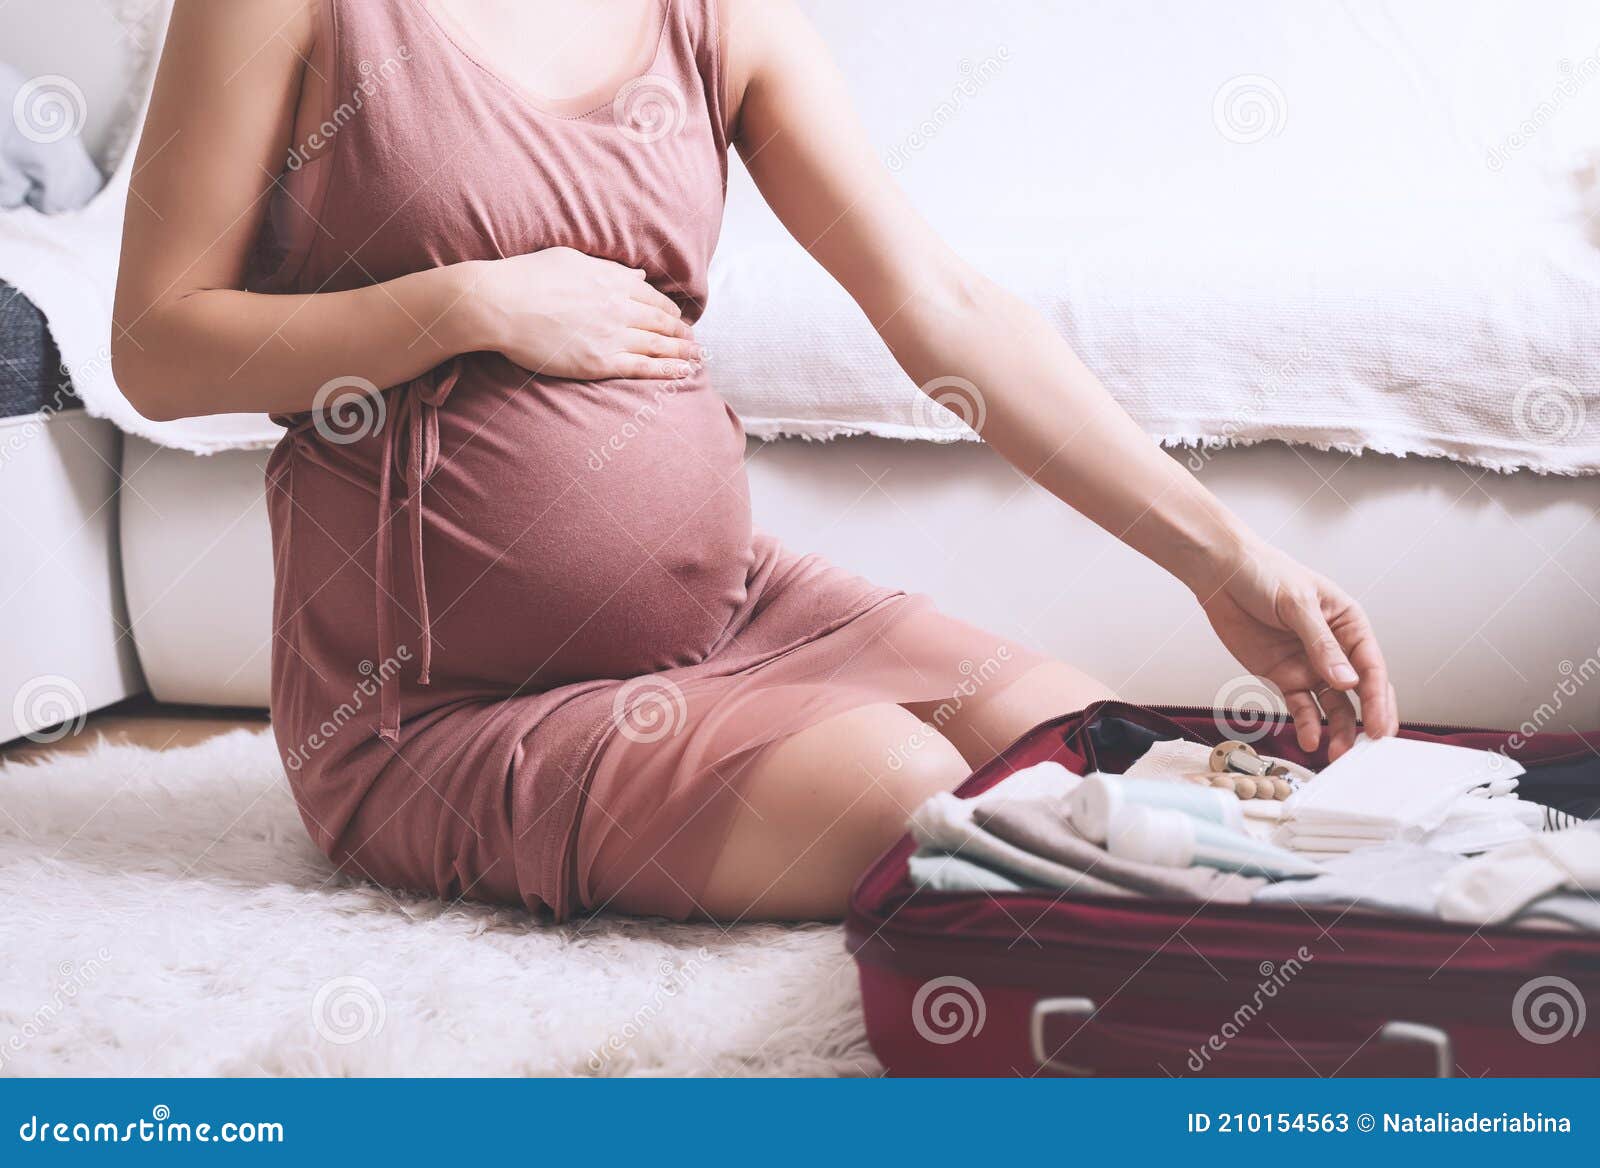 close-up belly of pregnant woman with travel bag of clothes and necessities. mother during pregnancy preparing and packing